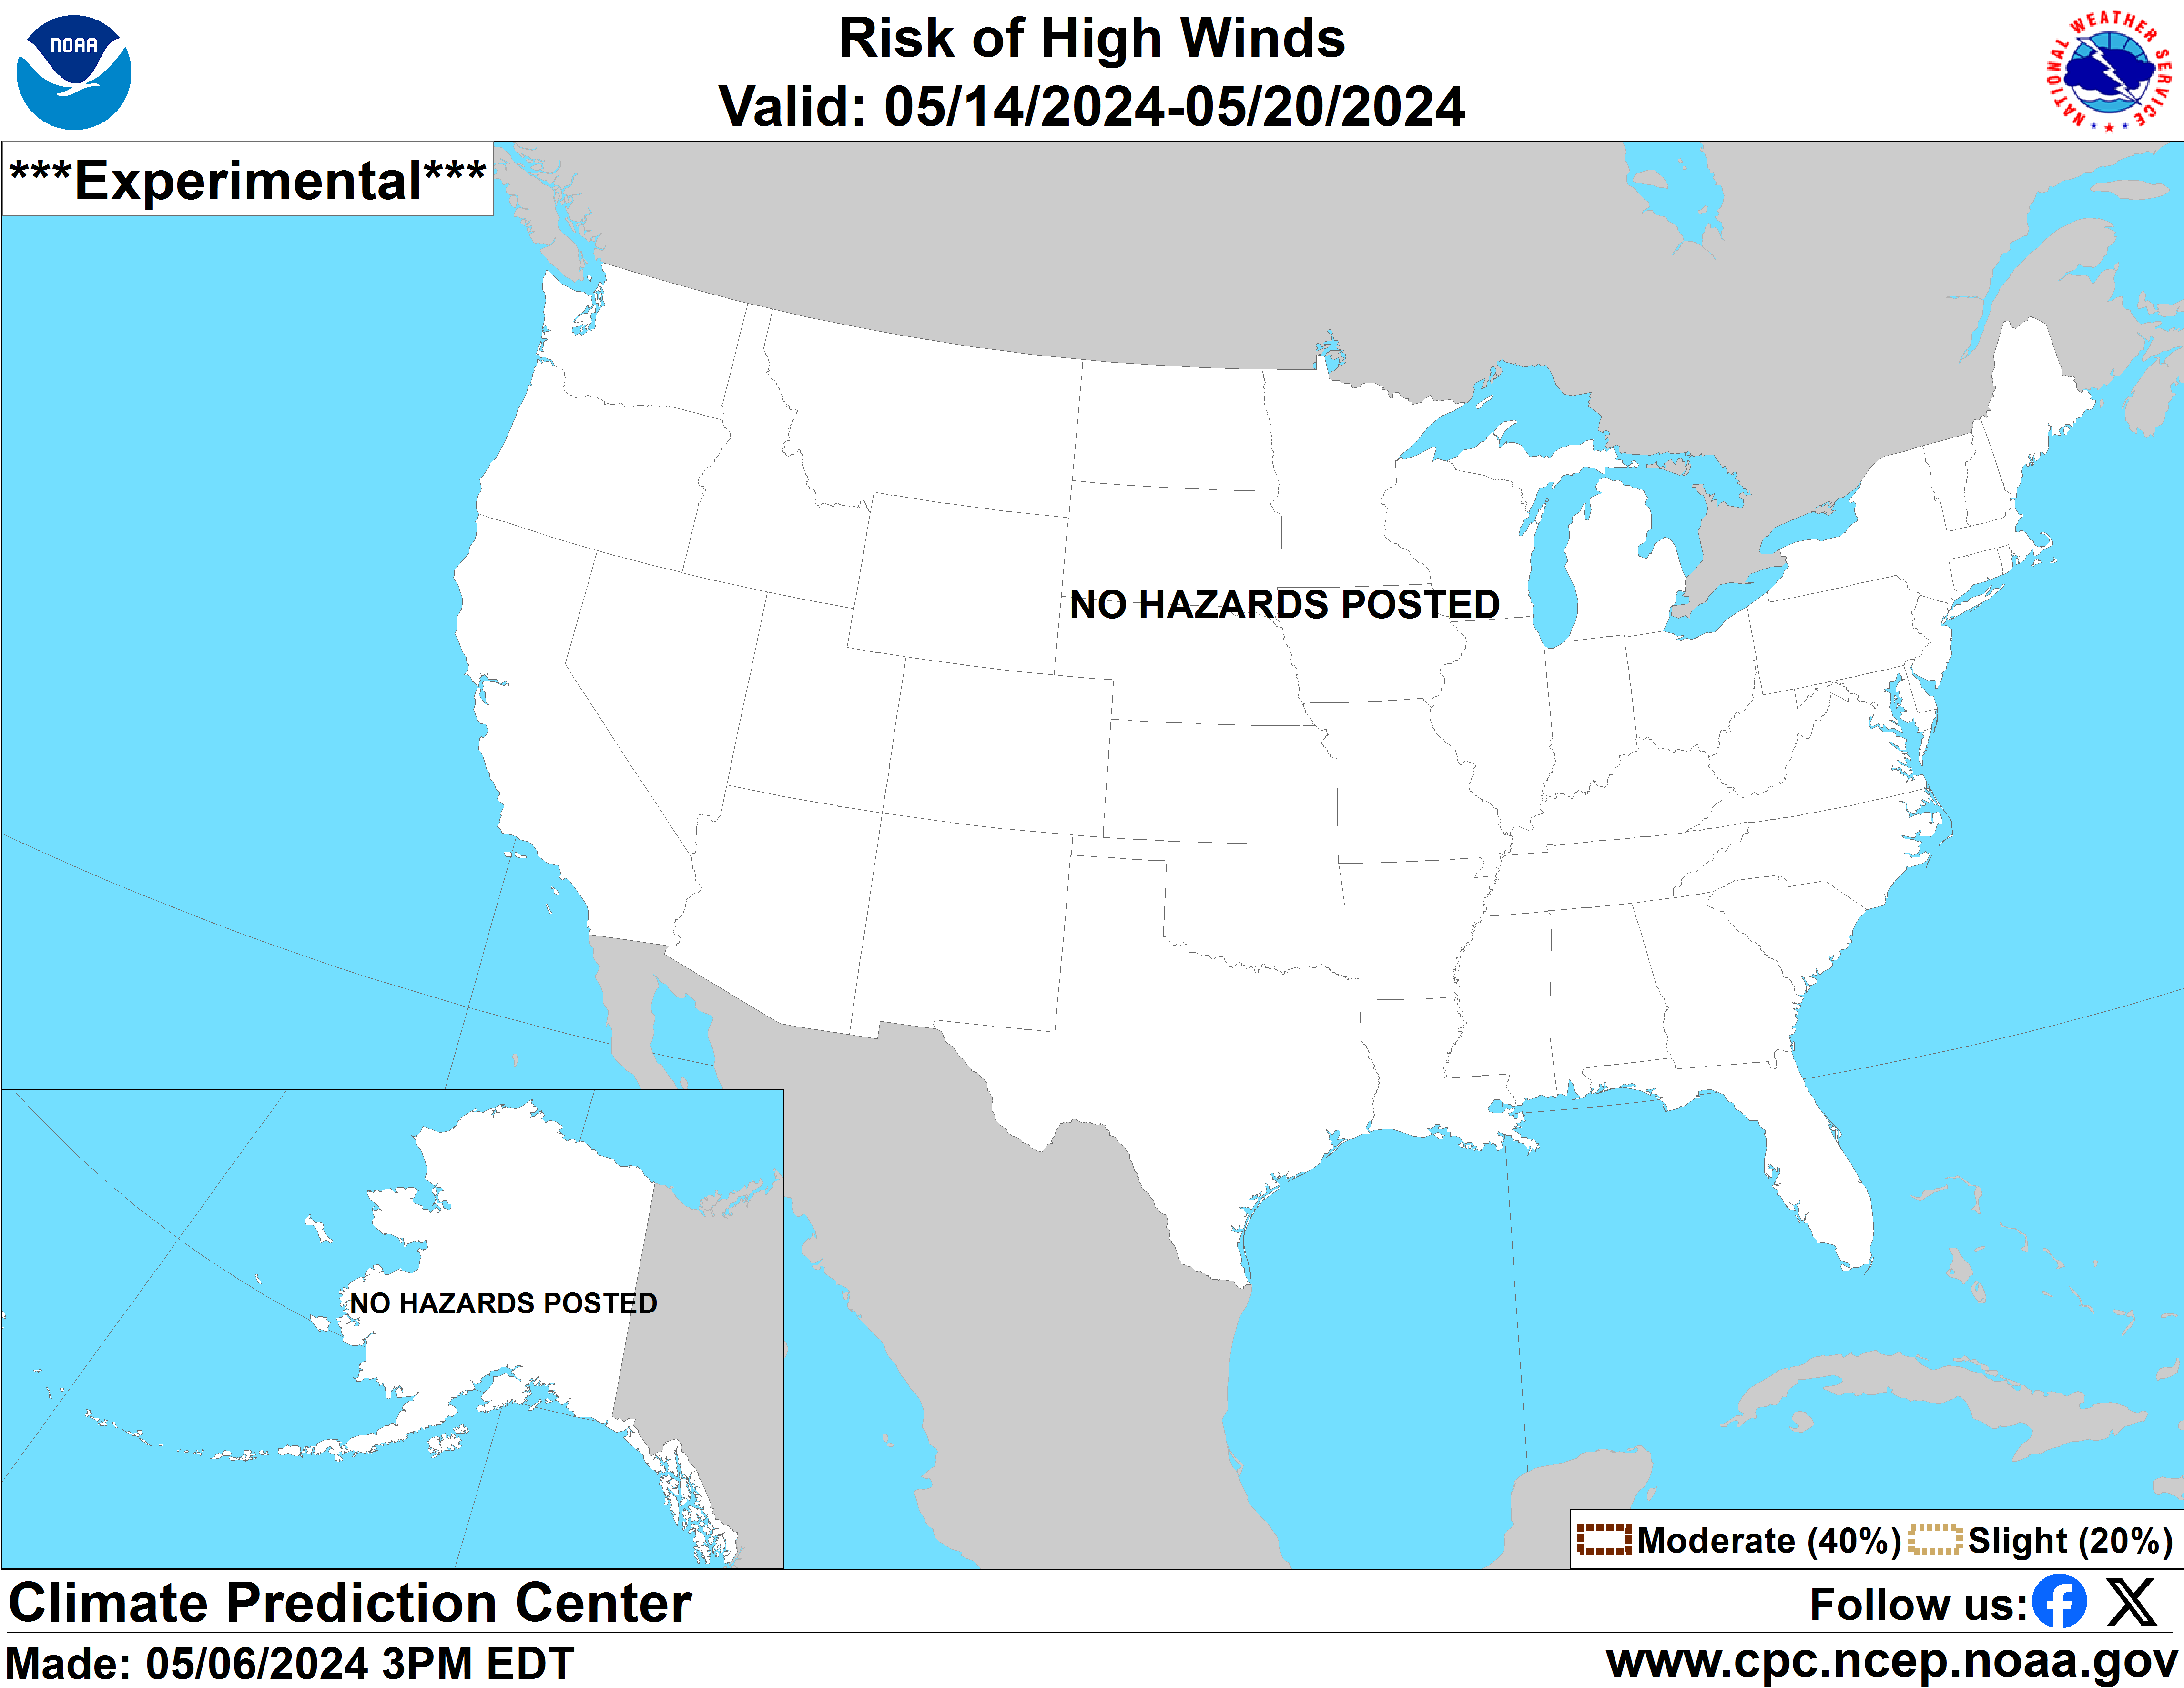 CPC's 8-14 day hazard outlook for high winds